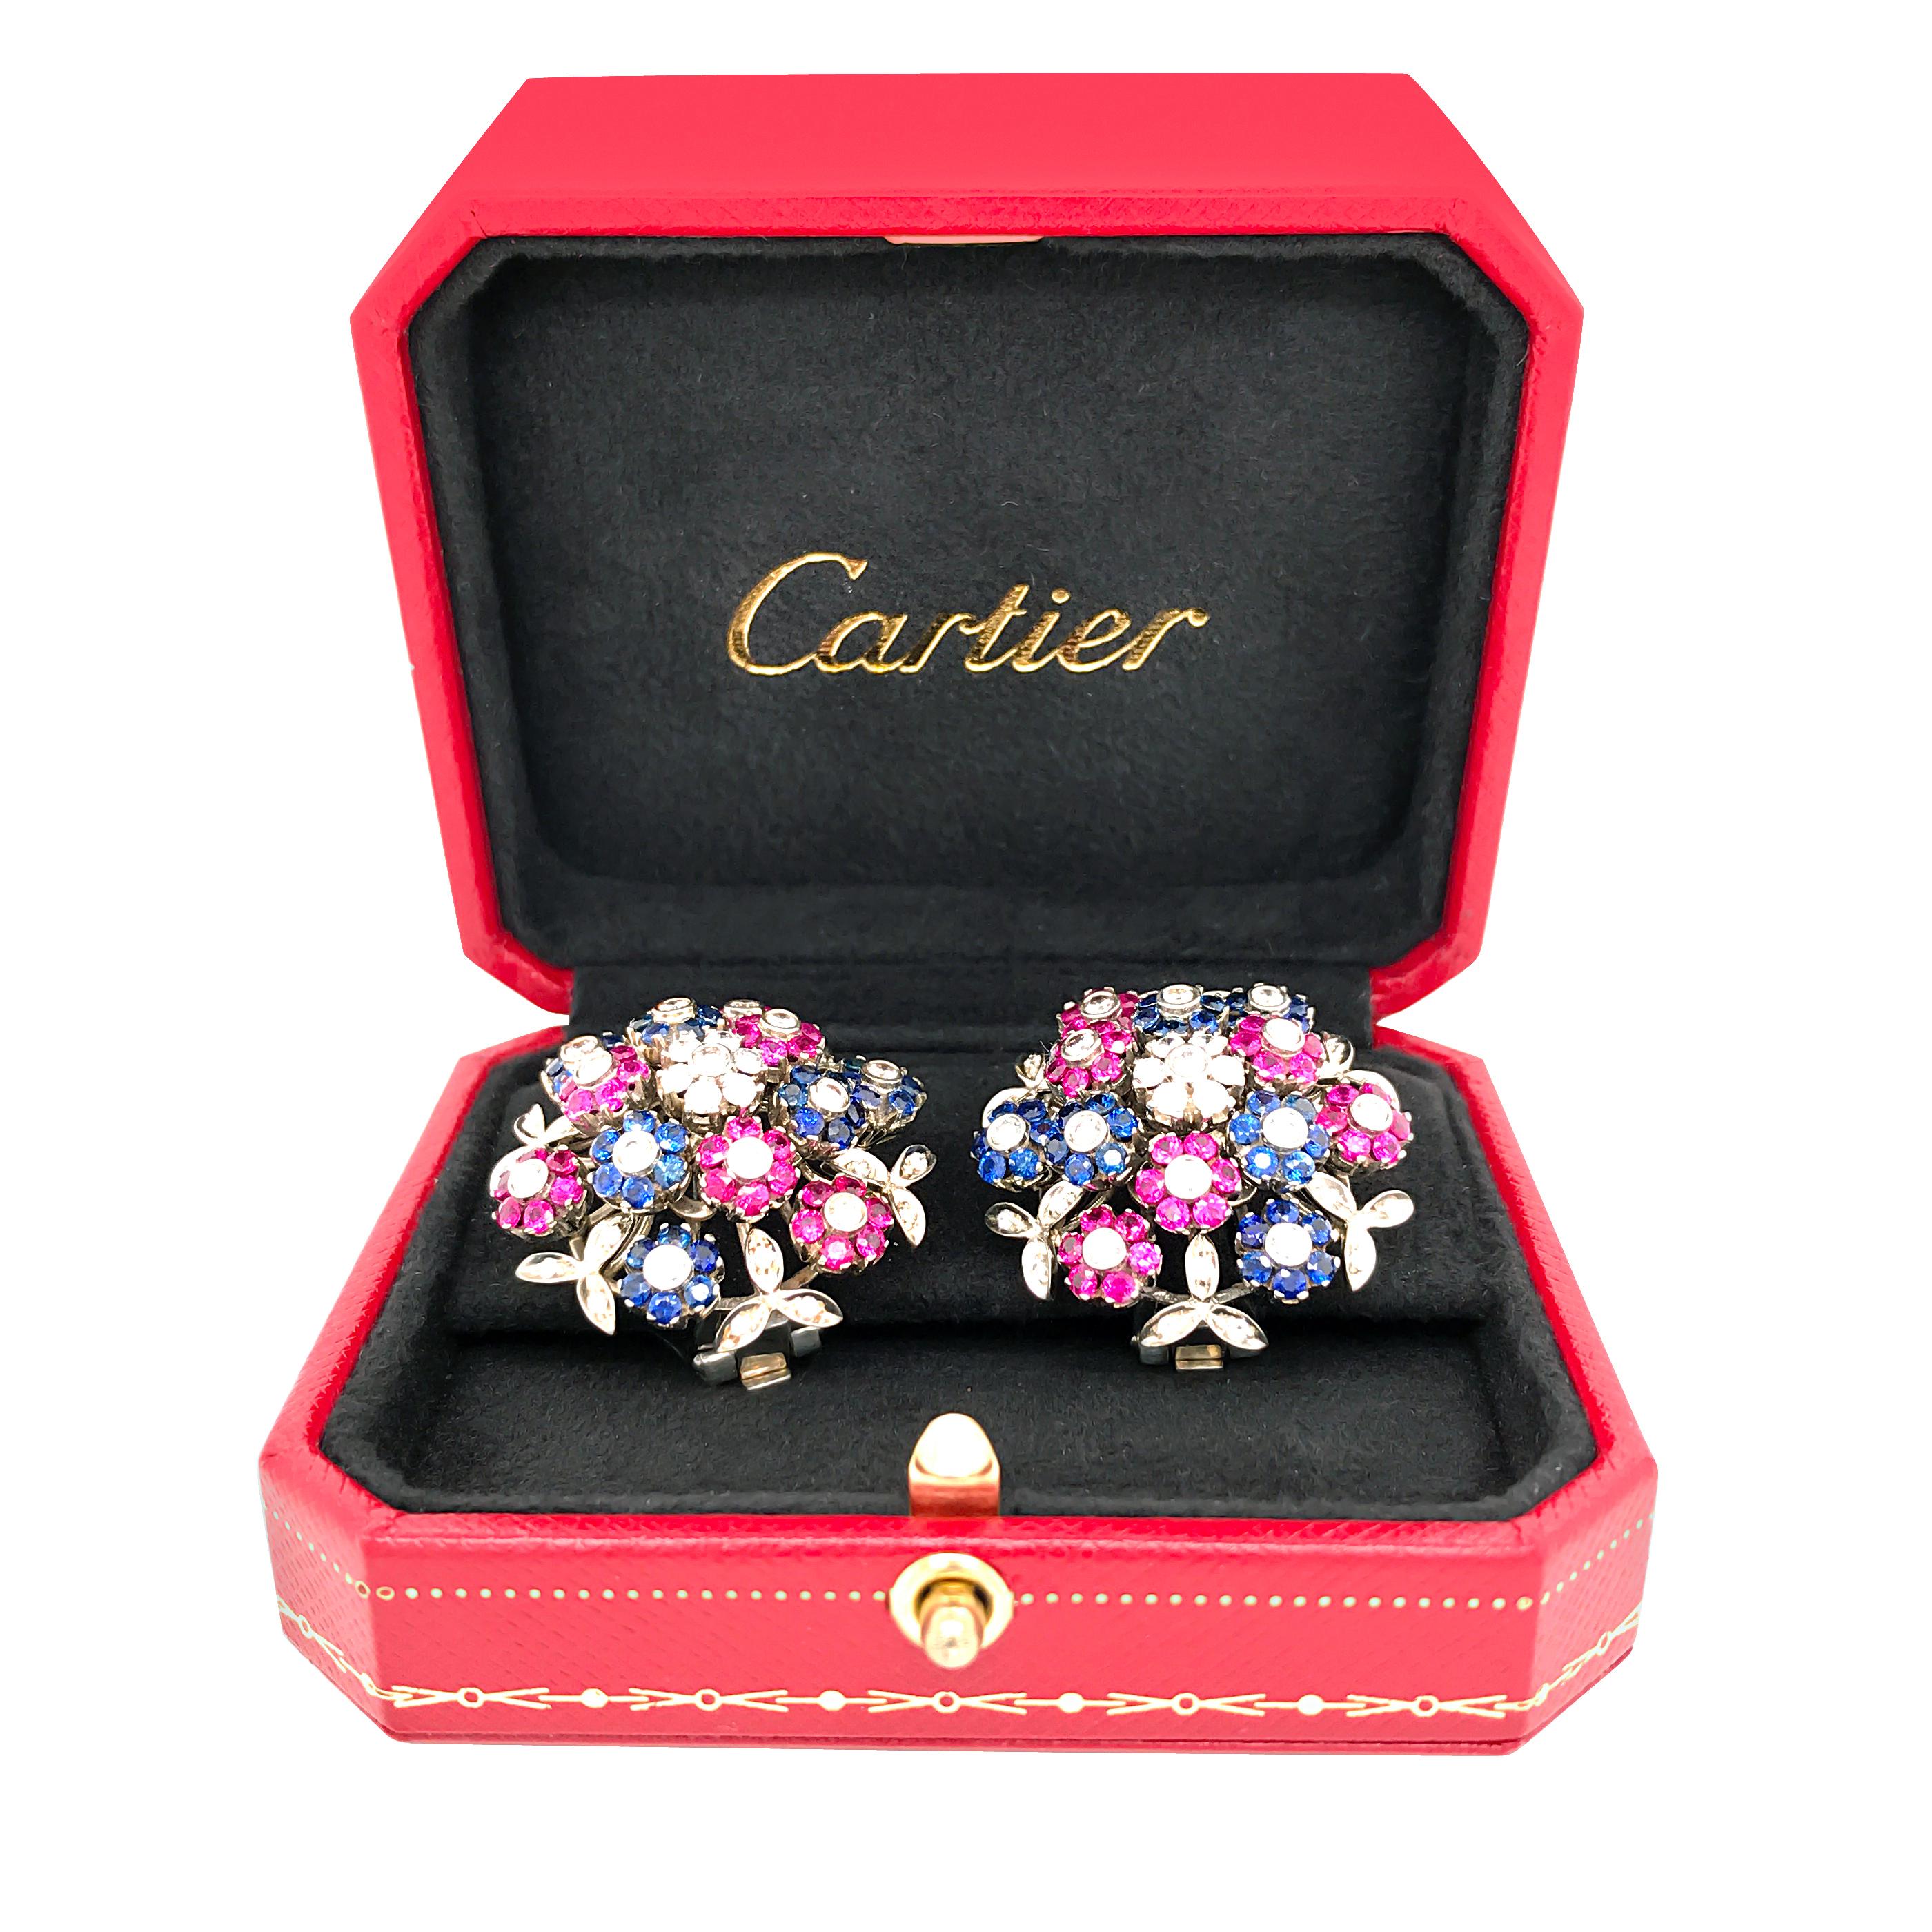 The Cartier earrings designed as bouquets, set en tremblant with brilliant-cut diamonds, rubies and sapphires;signed Cartier, French Mark, estimated total diamond weight: 1.80 carats, Sapphire 1.4 carat and Ruby 1.4 carar, mounted in 18k white gold;